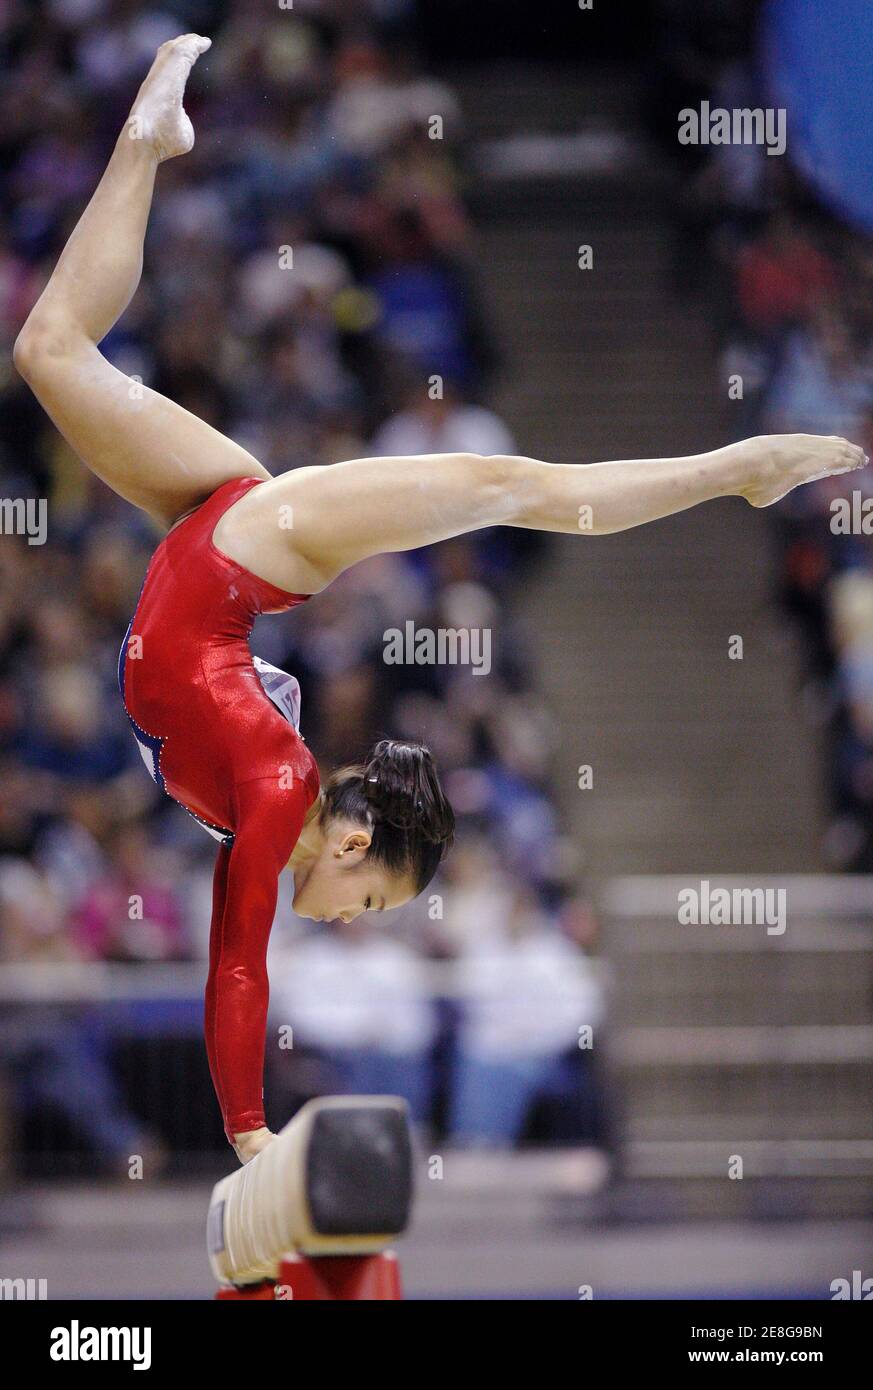 Ivana Hong of the U.S. performs her routine in women's beam final at the Gymnastic World Championships at the O2 Arena in London October 18, 2009. Hong came third in the event.  REUTERS/Jerry Lampen (BRITAIN SPORT GYMNASTICS) Stock Photo